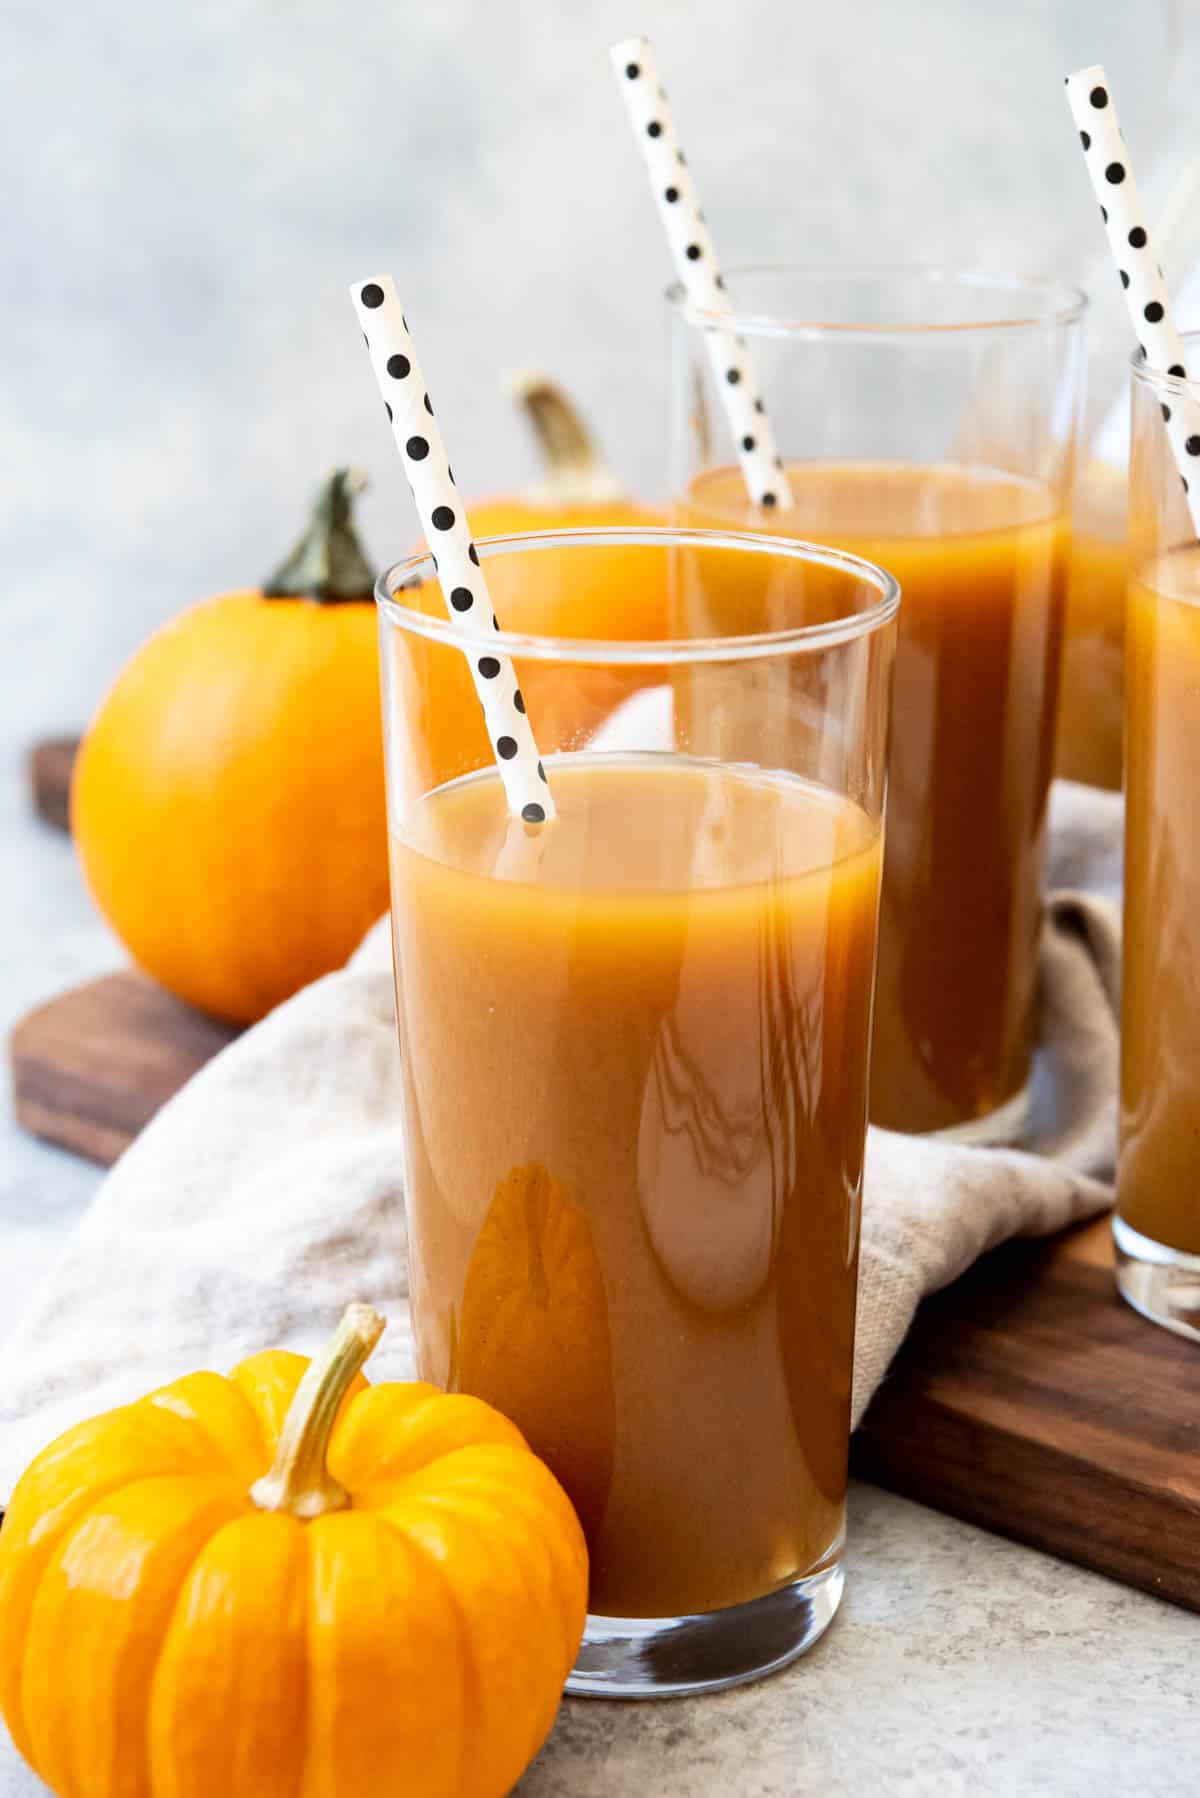 Tall glasses filled with pumpkin juice with spotted straws inside and pumpkins scattered around.